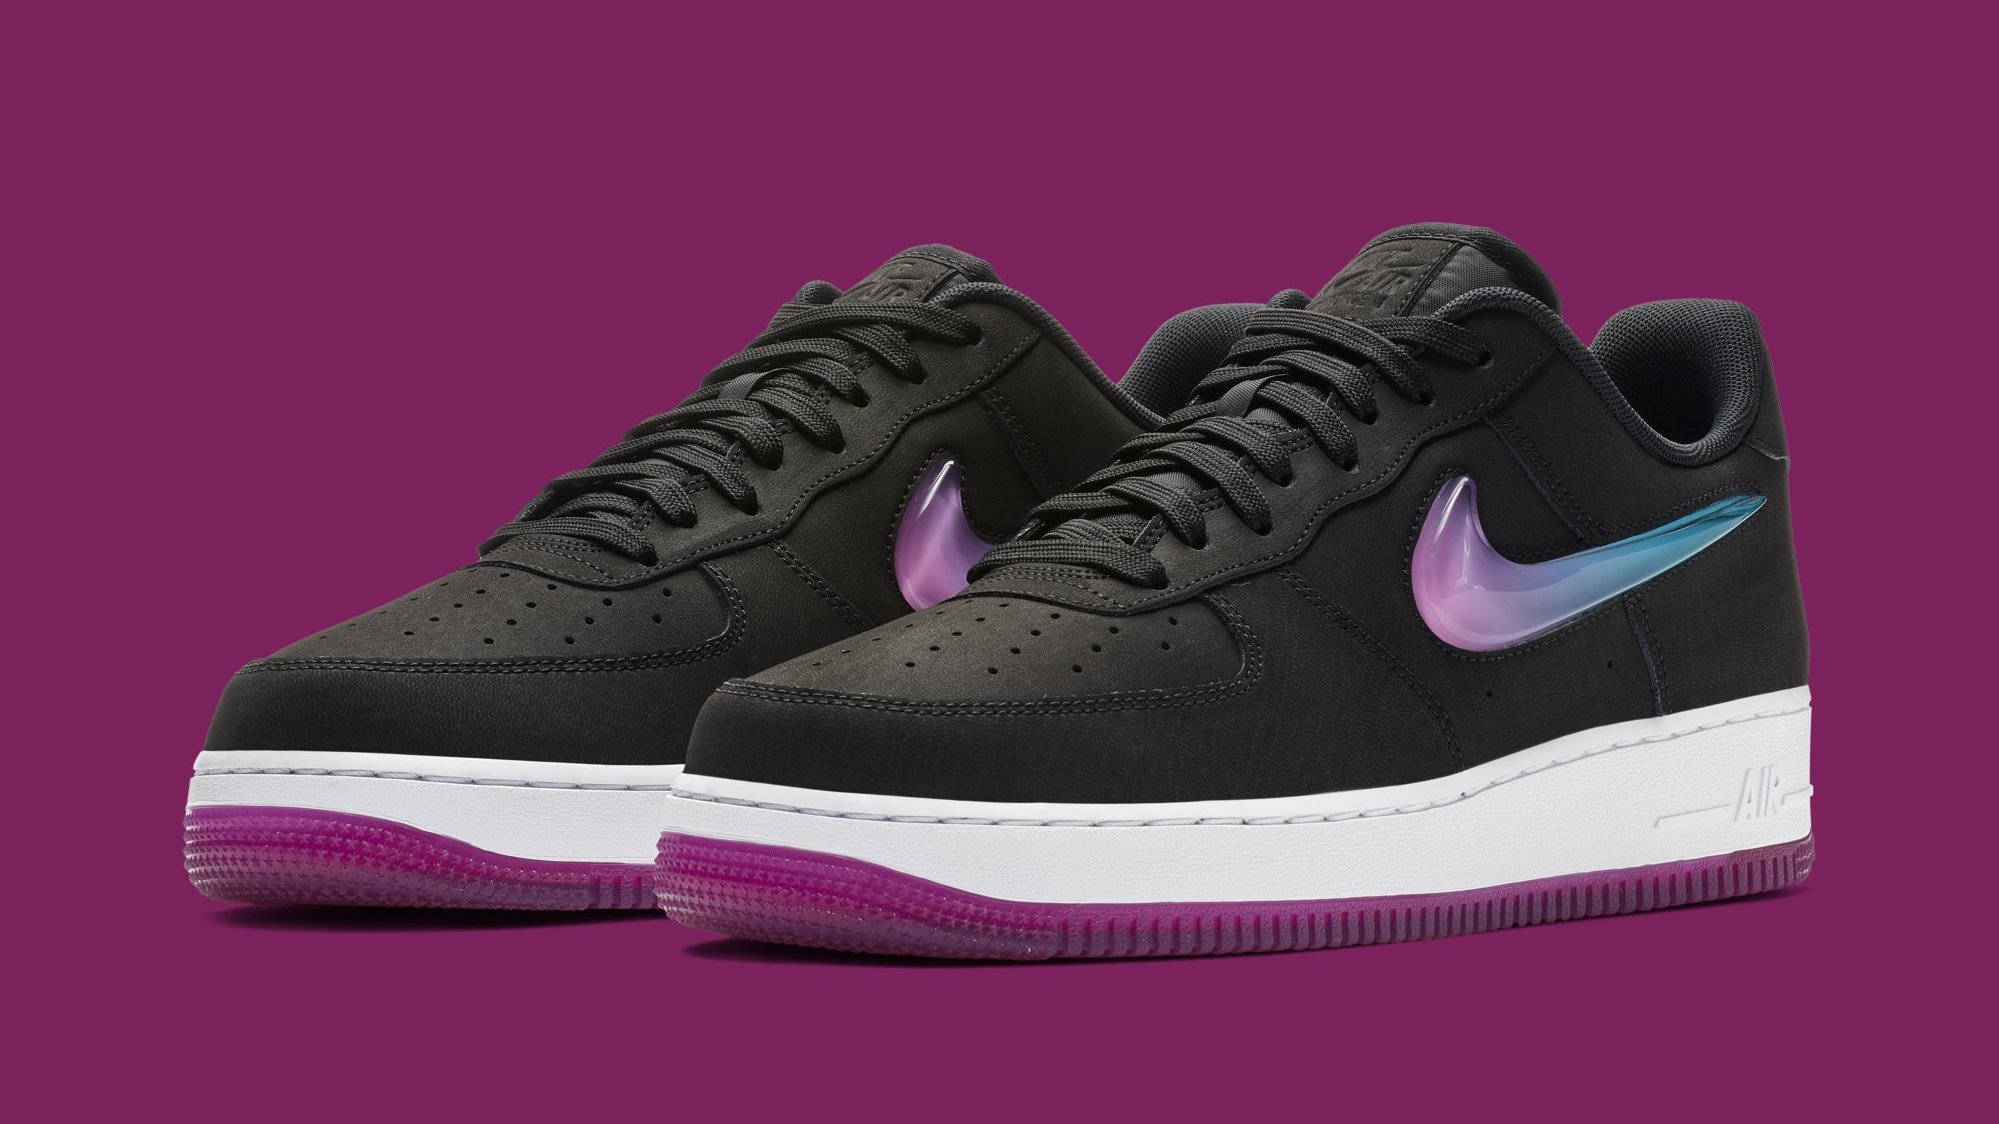 air force 1 purple and blue